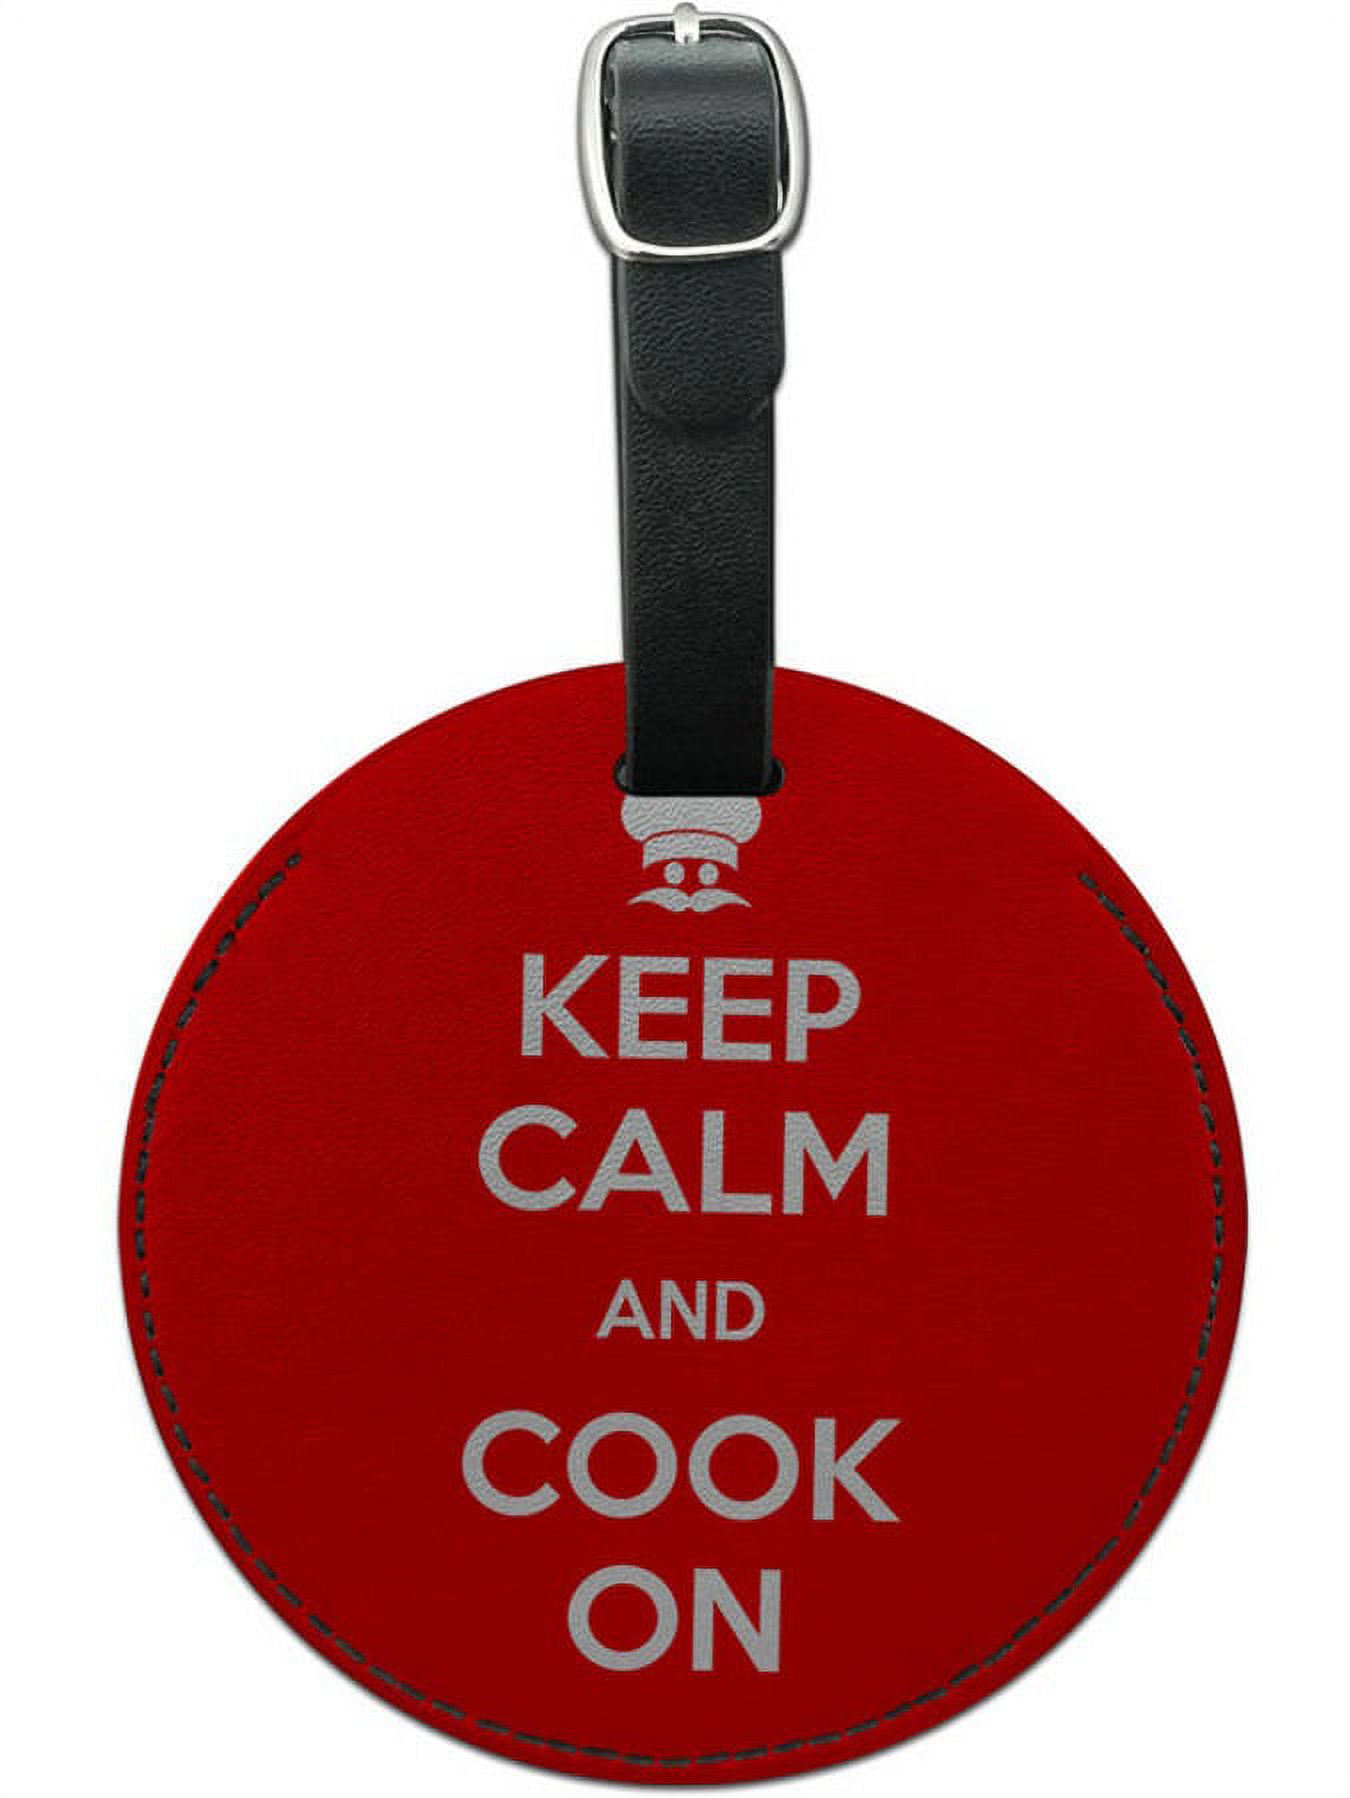 Keep Calm And Cook On Chef Hat Round Leather Luggage ID Tag Suitcase Carry-On - image 1 of 1